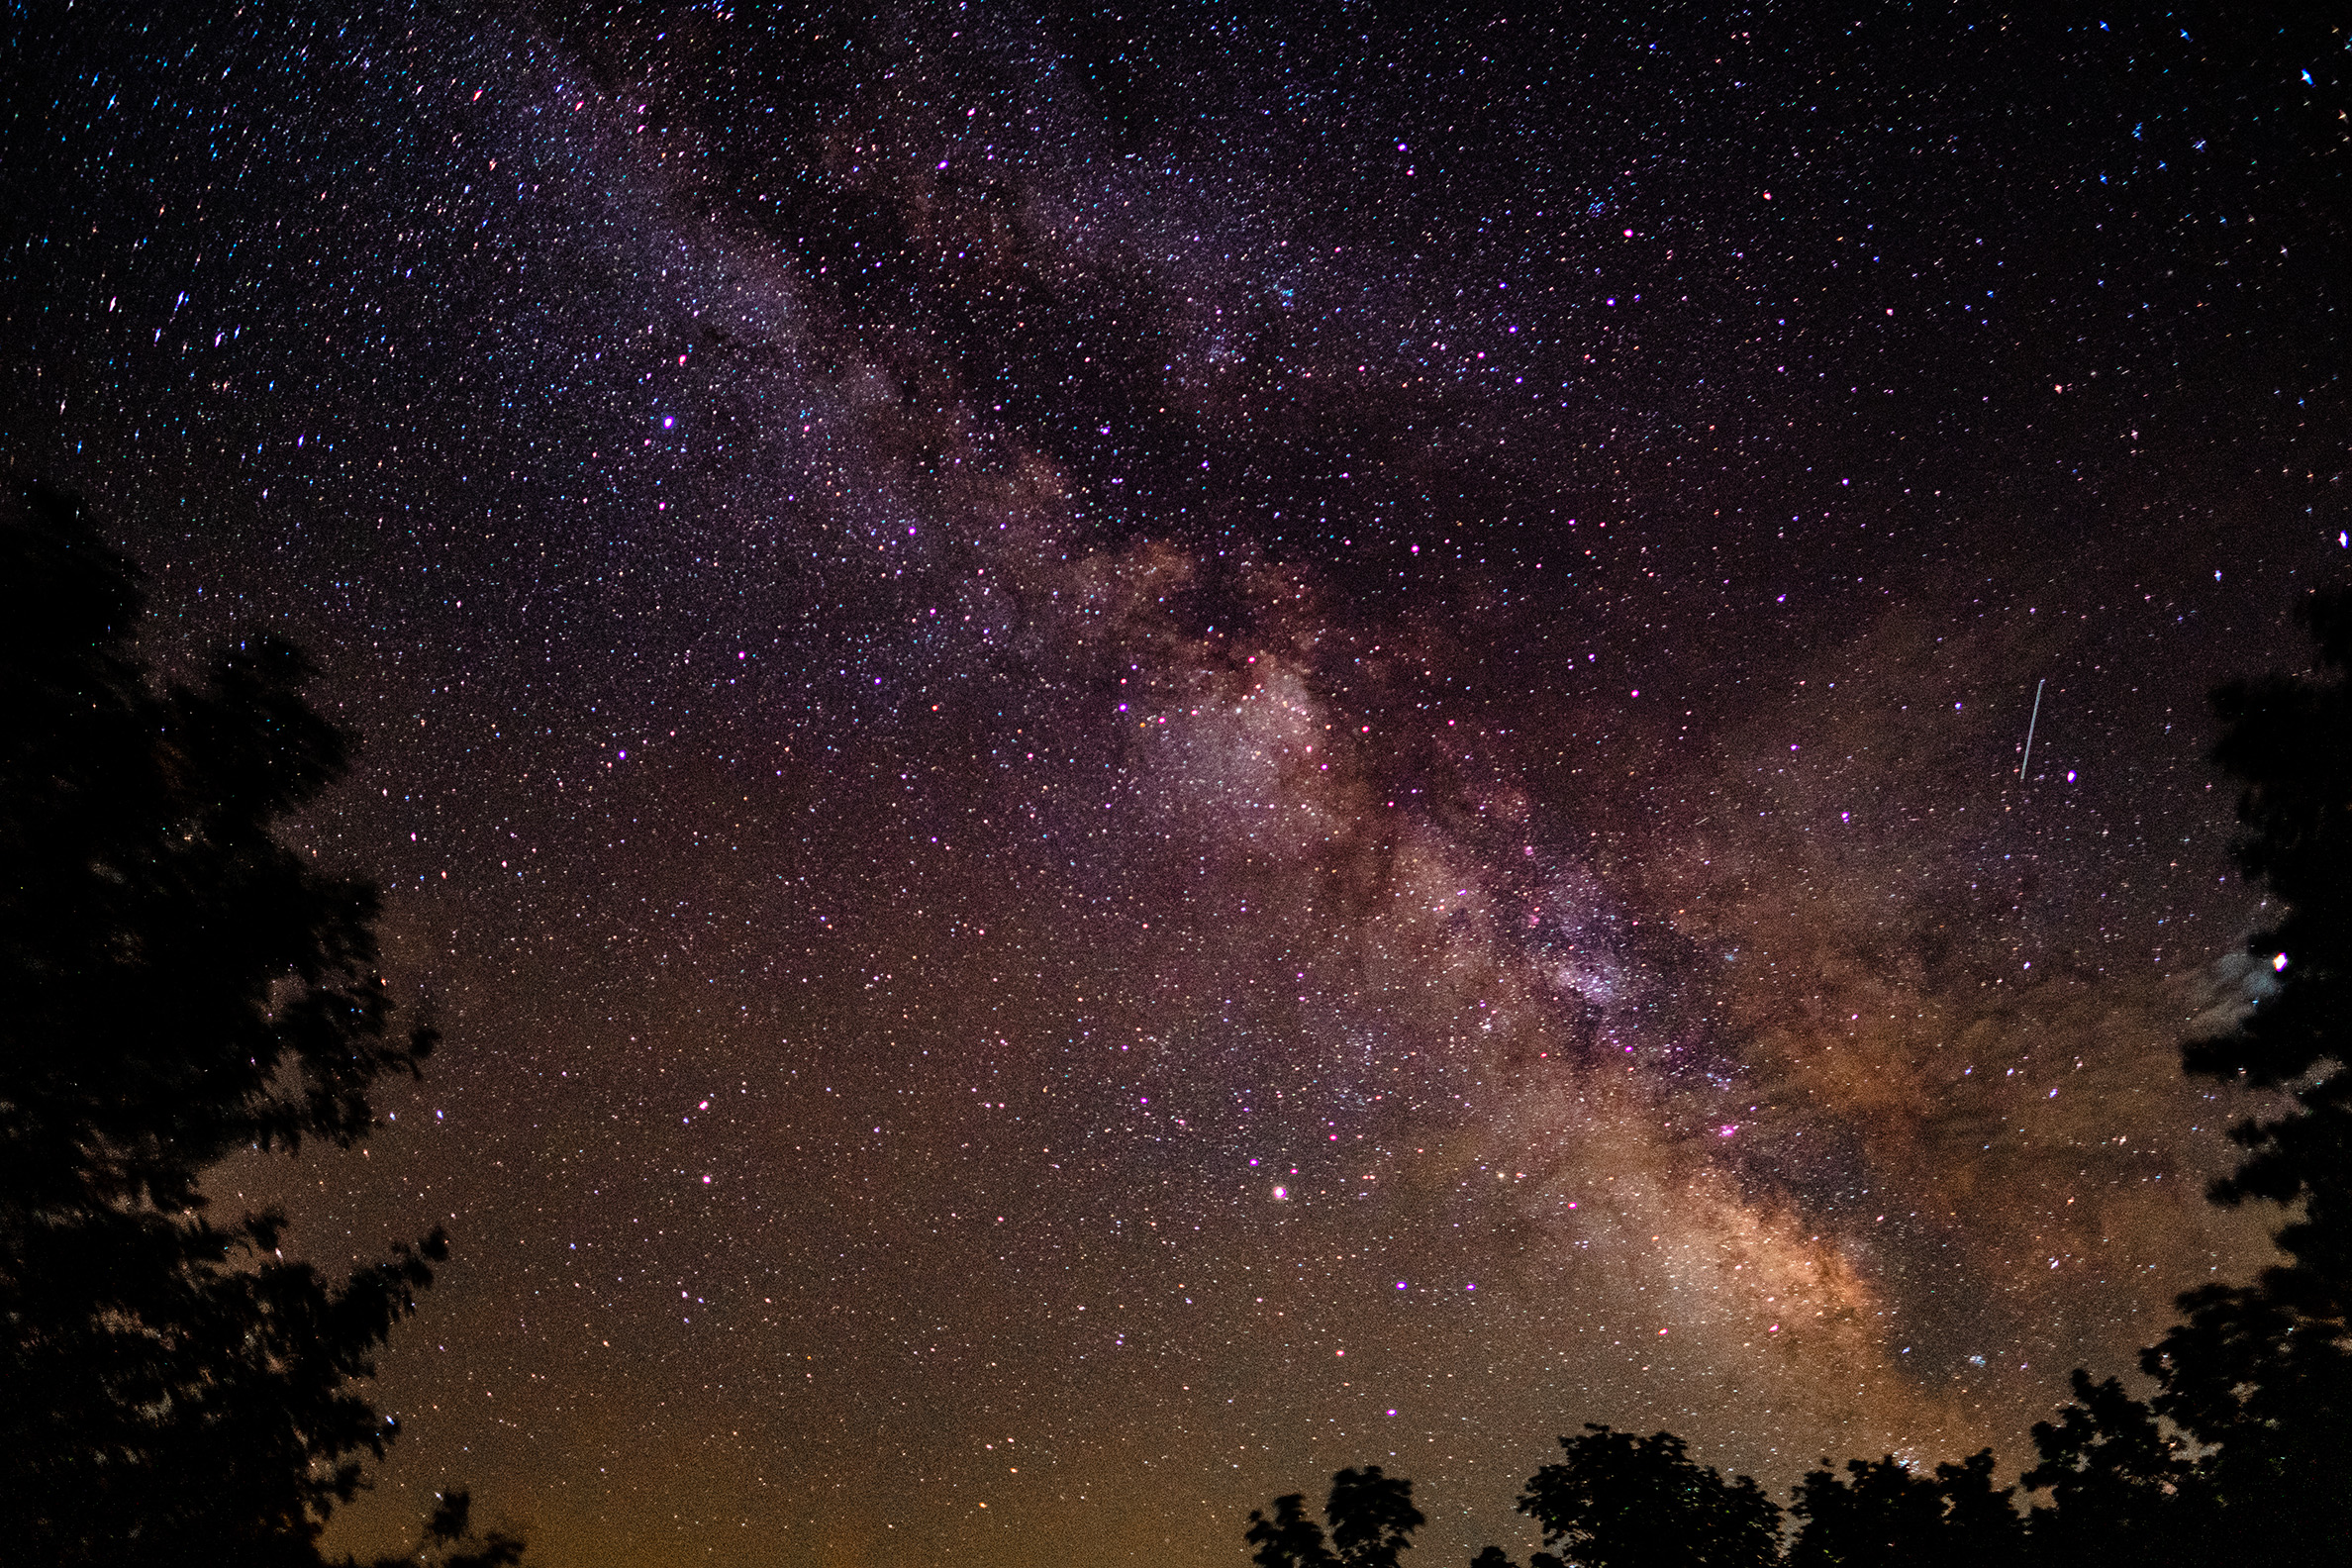 A photograph of the night sky showing thousands of stars and a brighter band across the center that is the Milky Way.